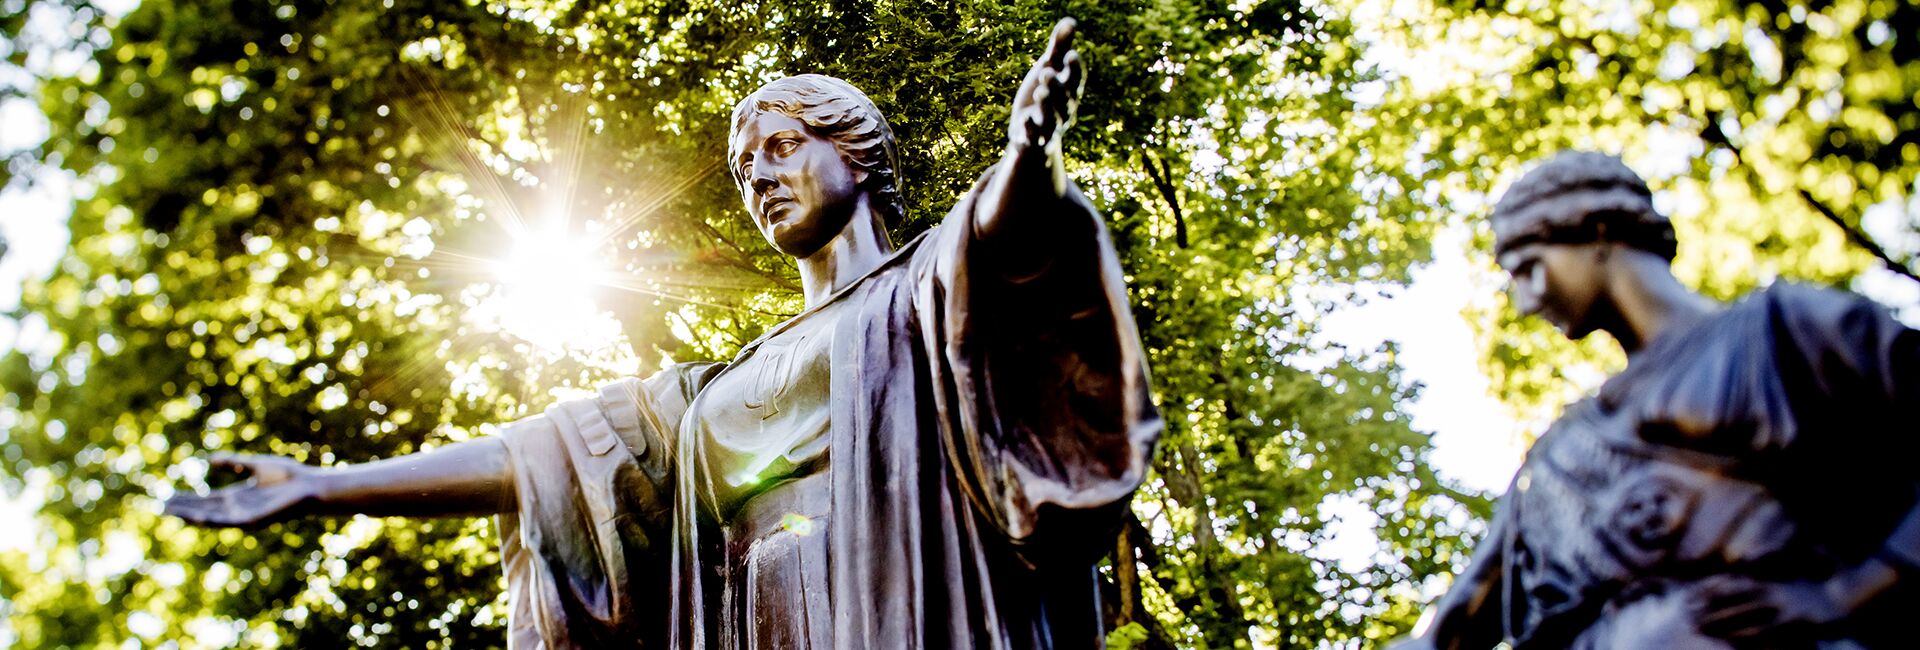 The sun gleams behind the statue of the Alma Mater